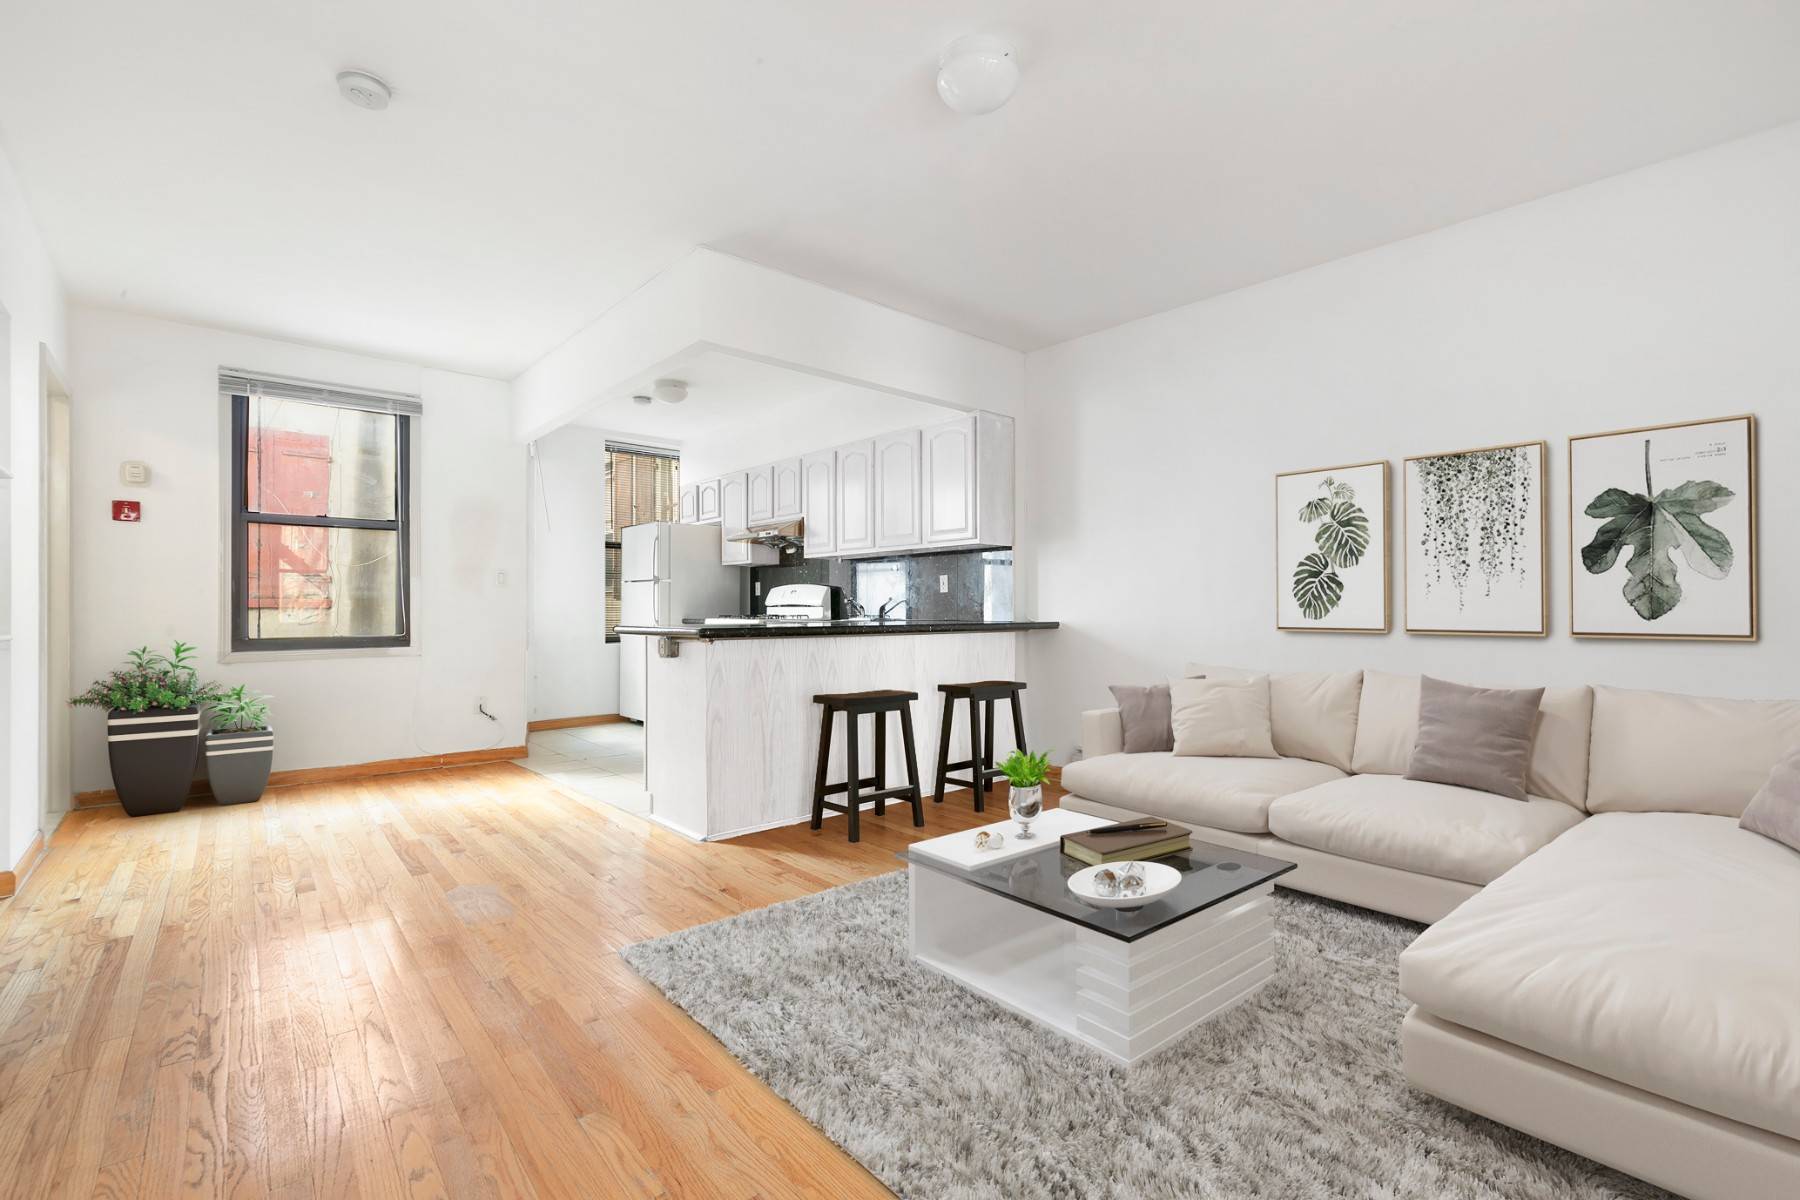 Welcome home to your Gorgeous and sun filled two bedroom apartment with unobstructed loft views of Centre Street situated between 2 of the most desirable neighborhoods in Manhattan.